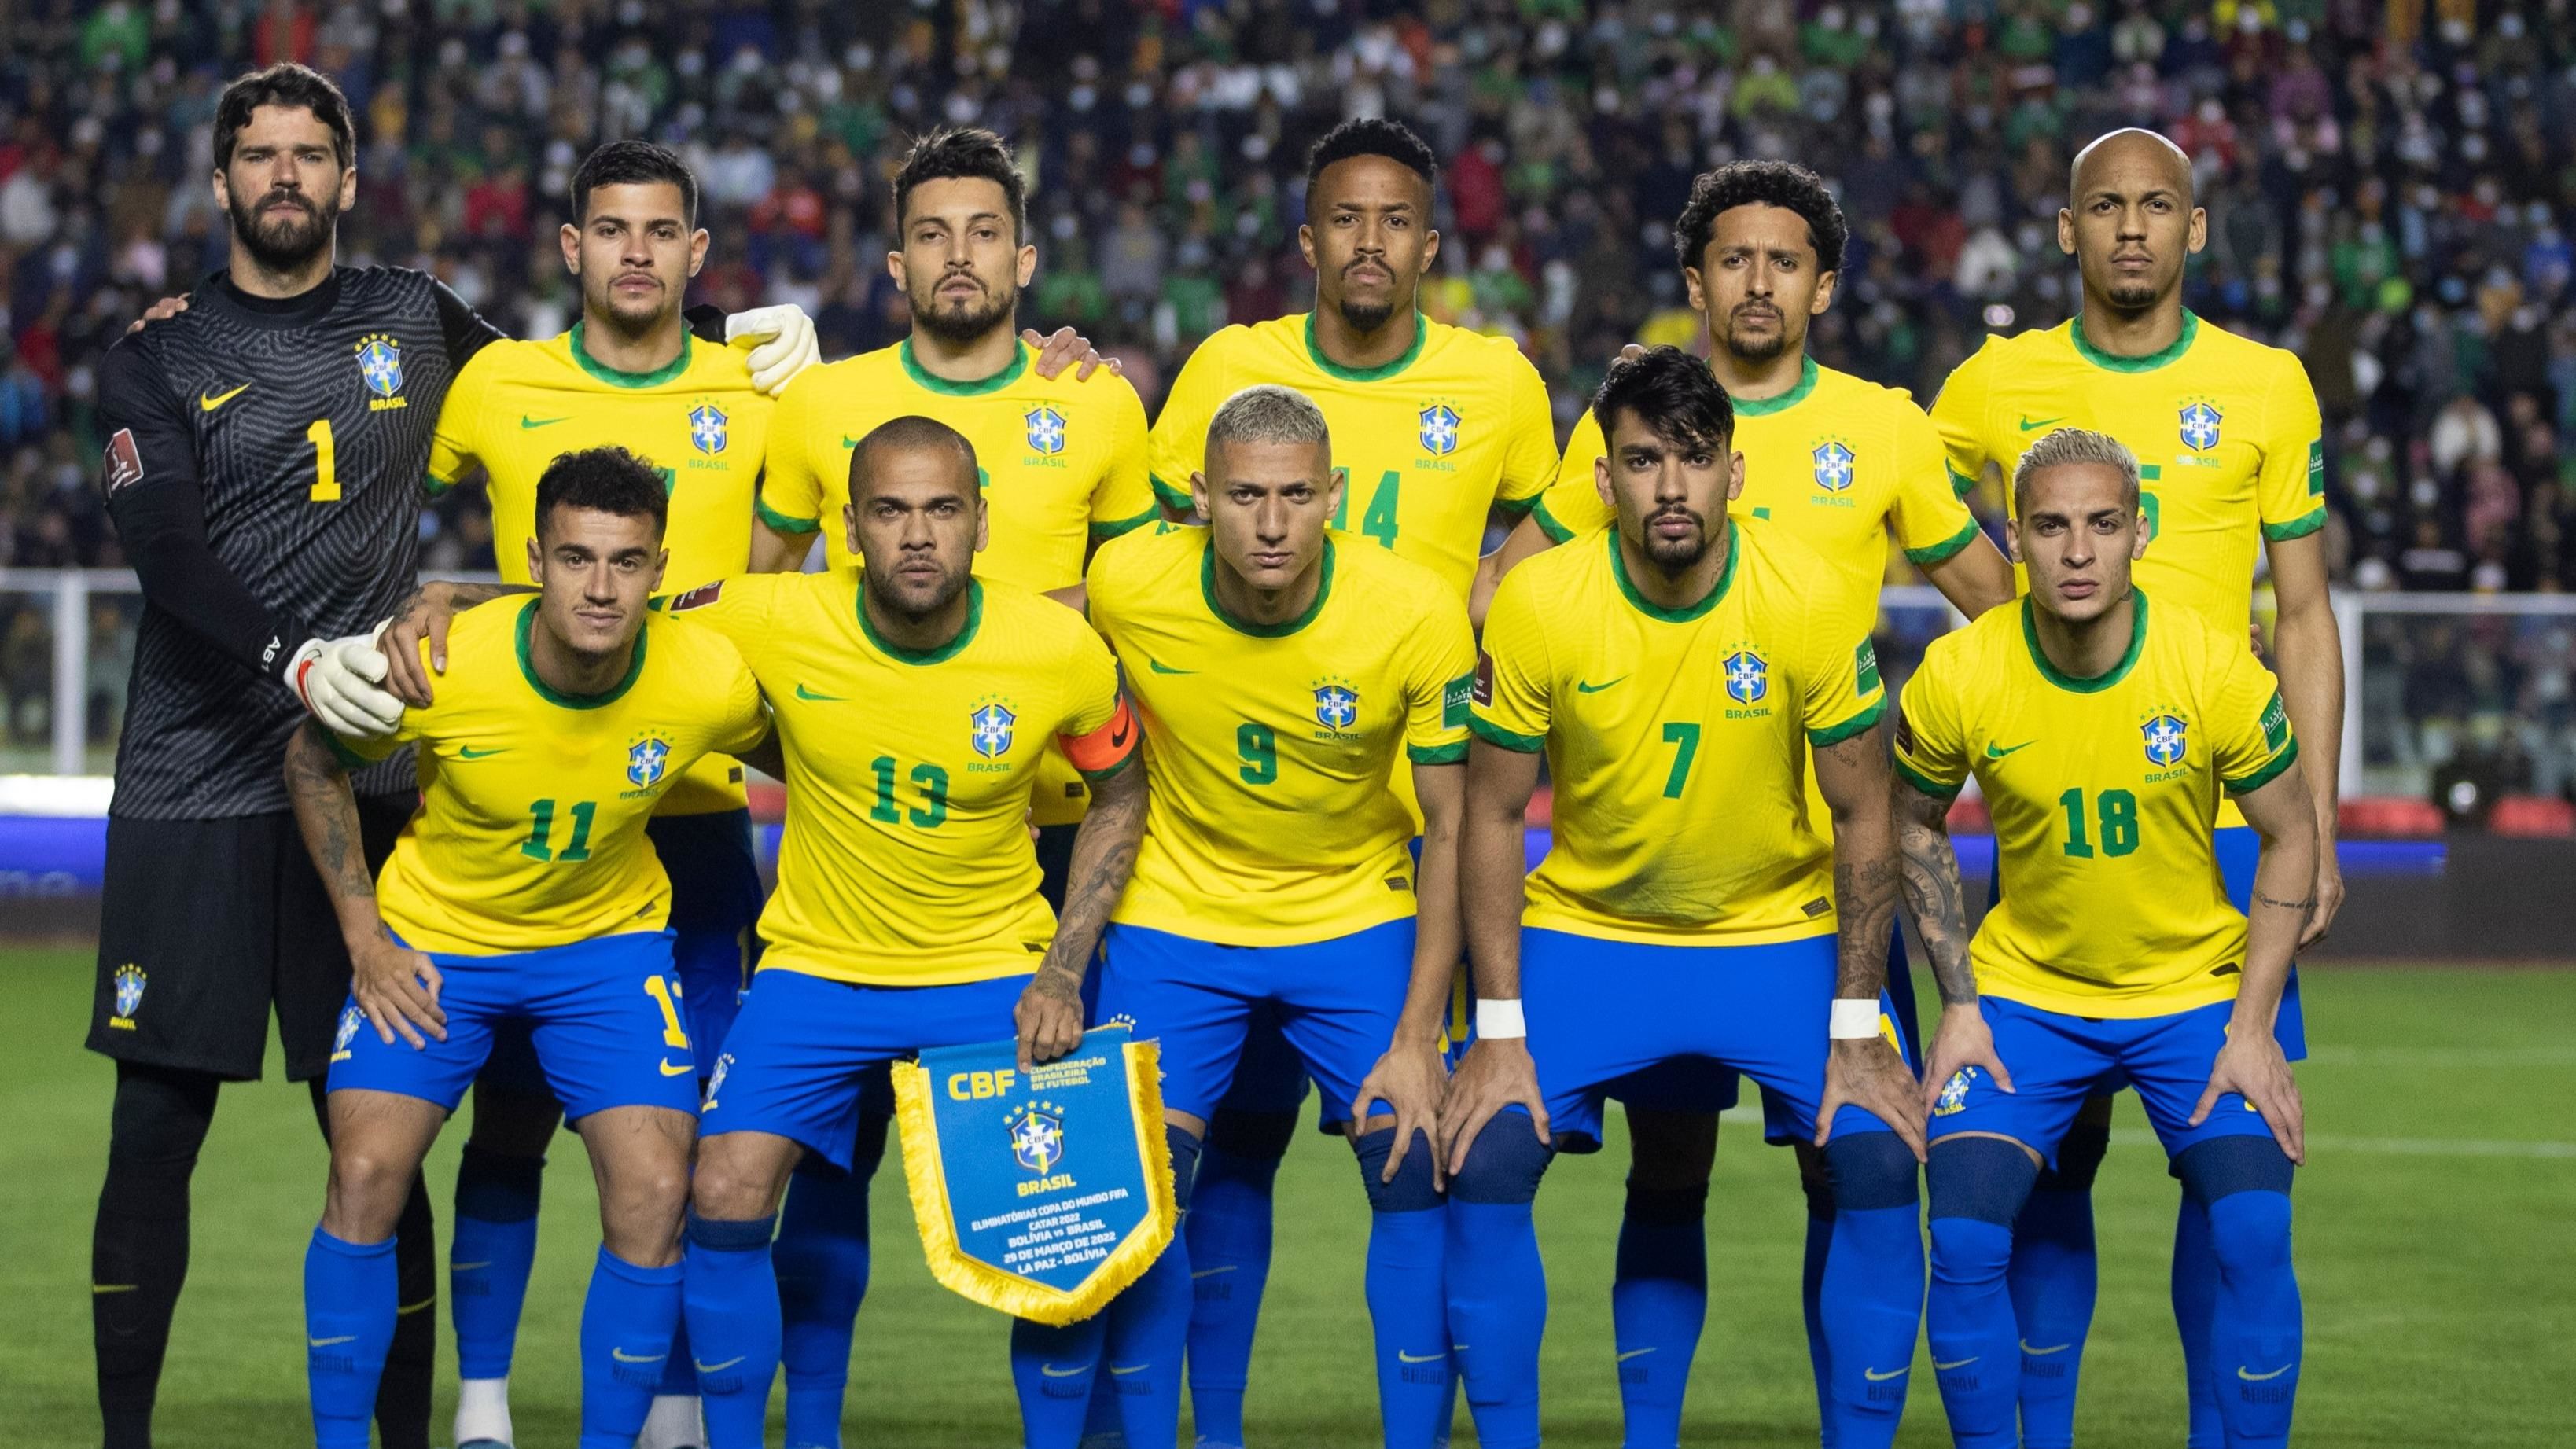 Brazilian national team for 2022 World Cup includes Dani Alves, 39